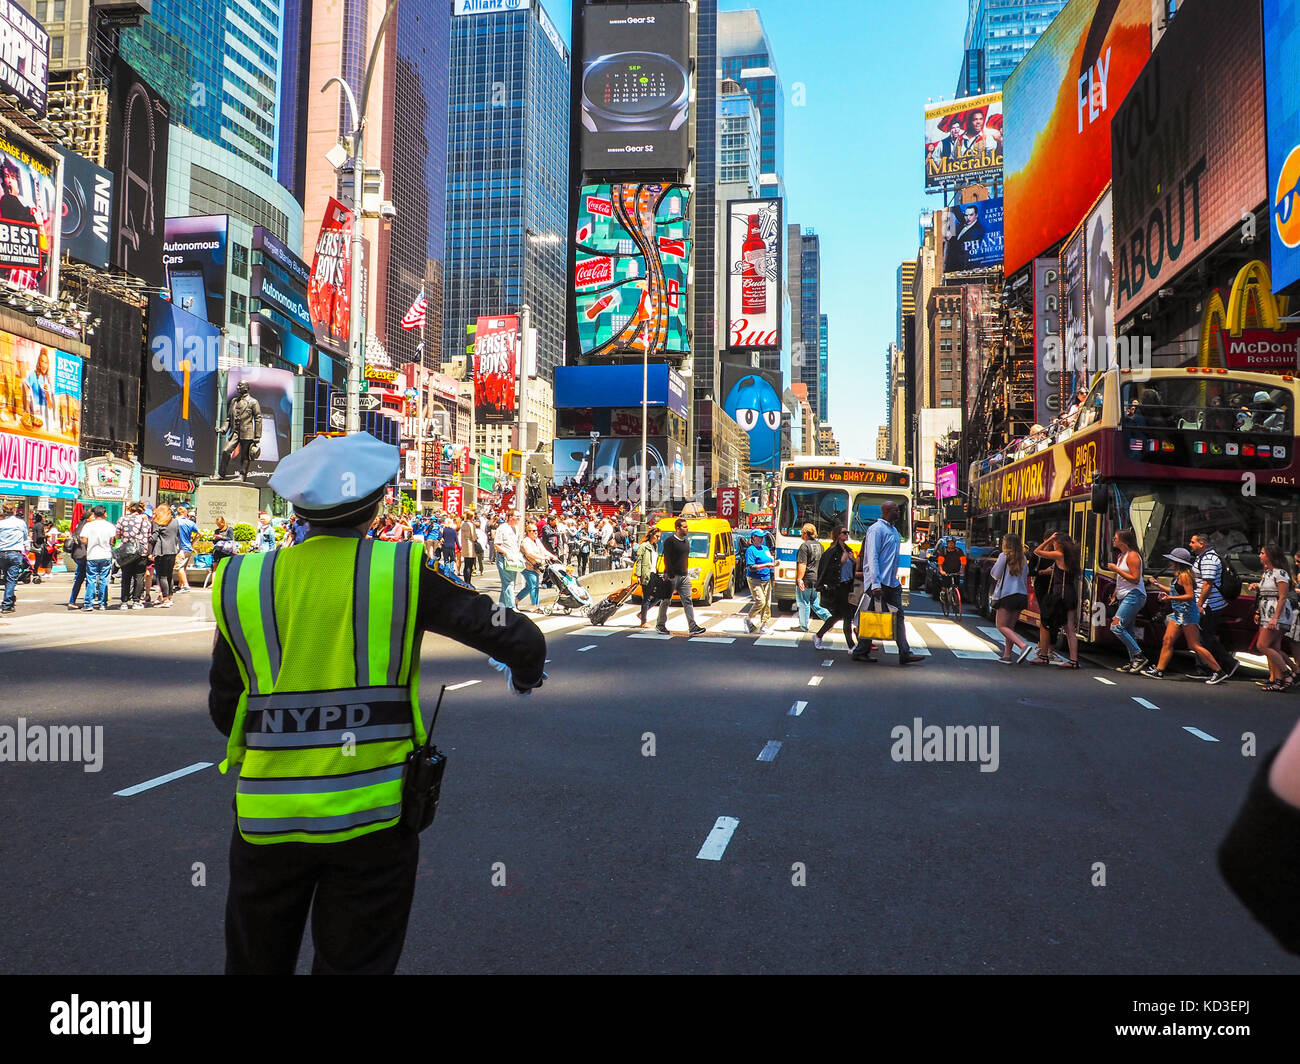 The policeman directs the traffic at the intersection in Time Square on Manhattan Stock Photo